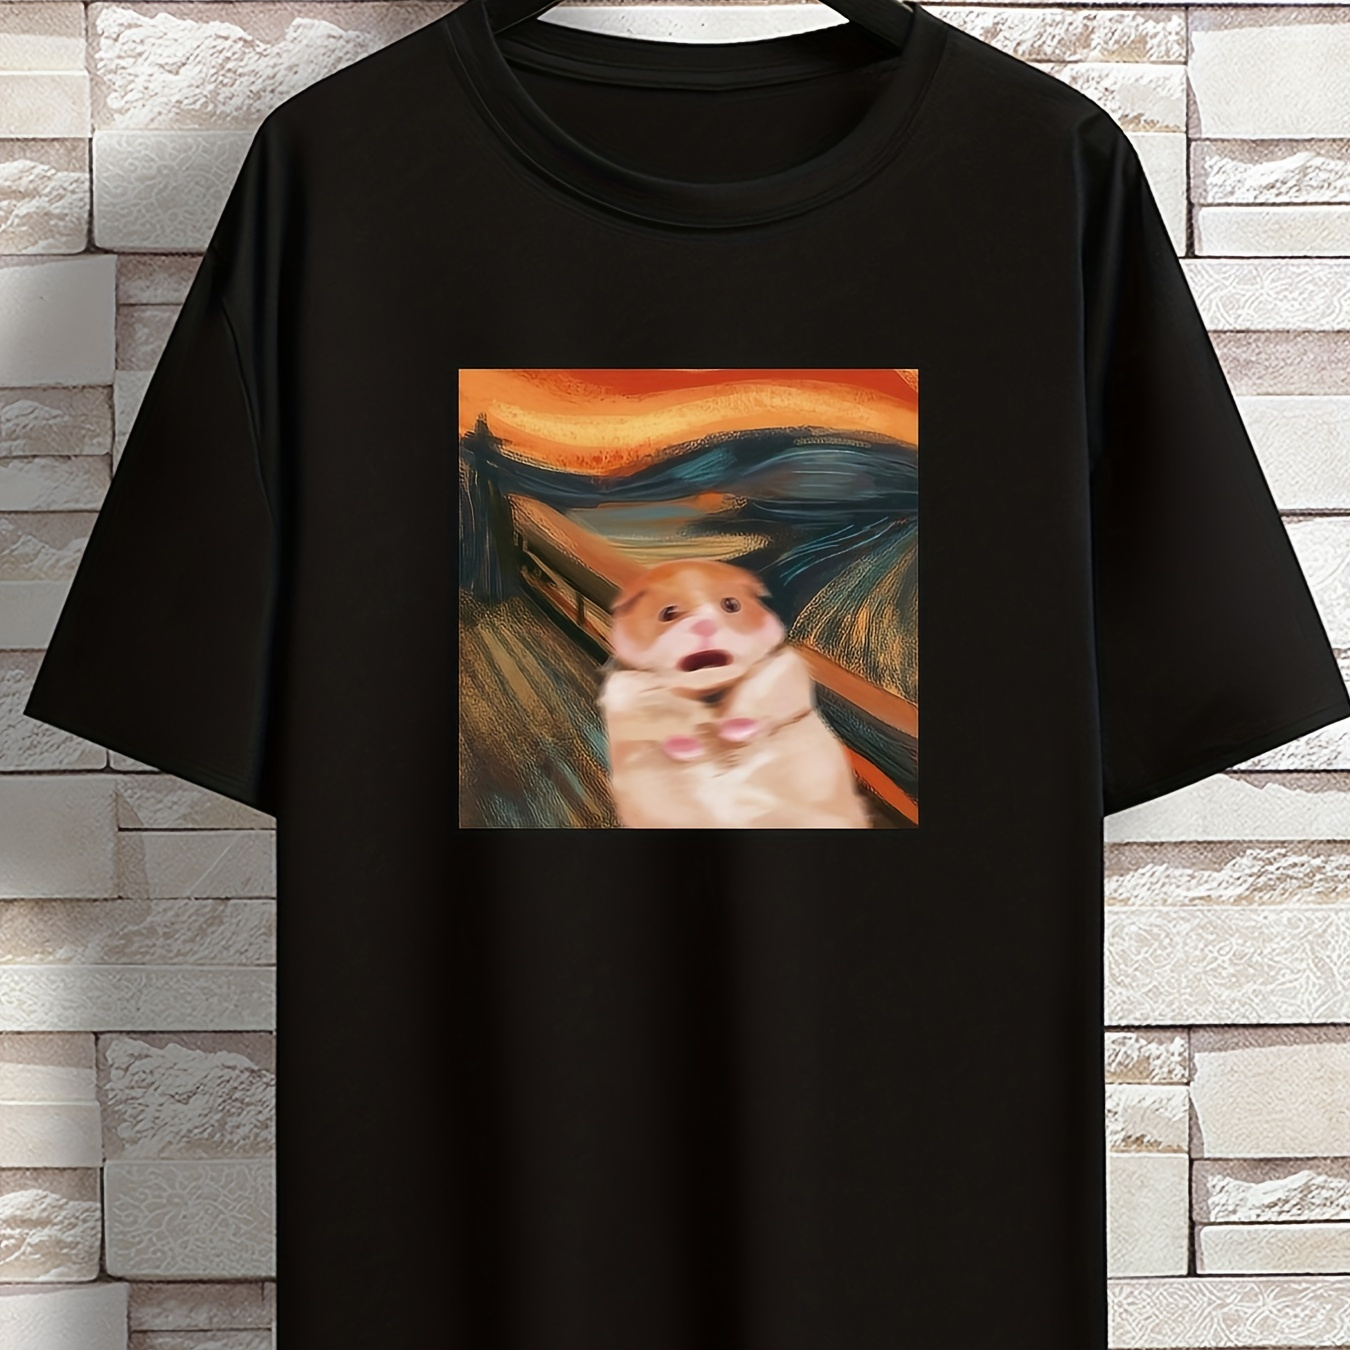 

Tees For Men, Funny Hamster In The Scream Painting Print T Shirt, Casual Short Sleeve Crew Neck Tshirt For Summer Spring Fall, Graphic Tees For Men, Tops As Gifts